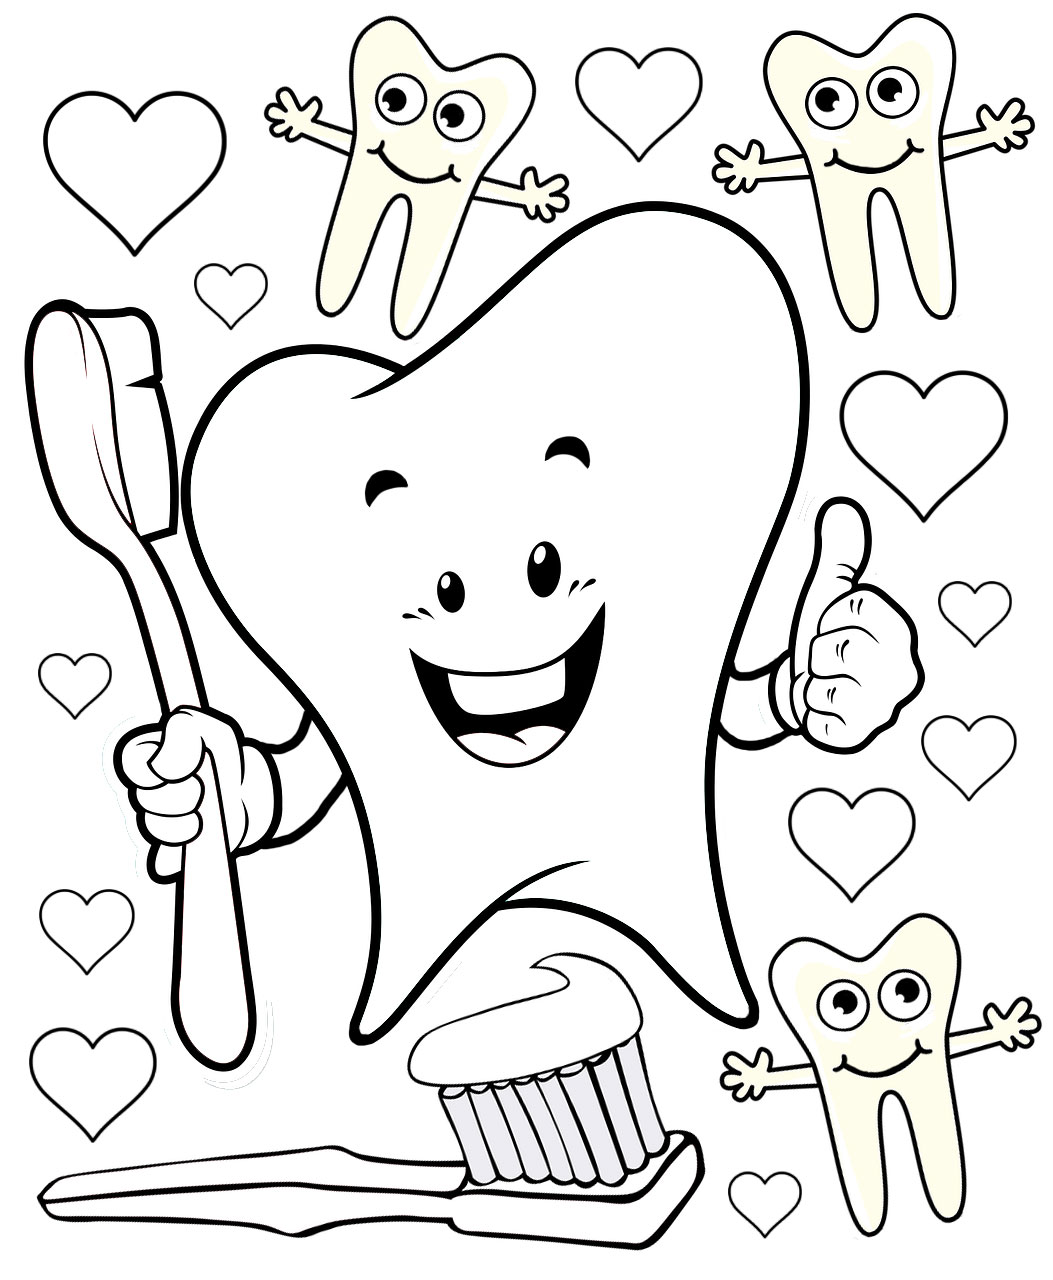 printable tooth coloring pages